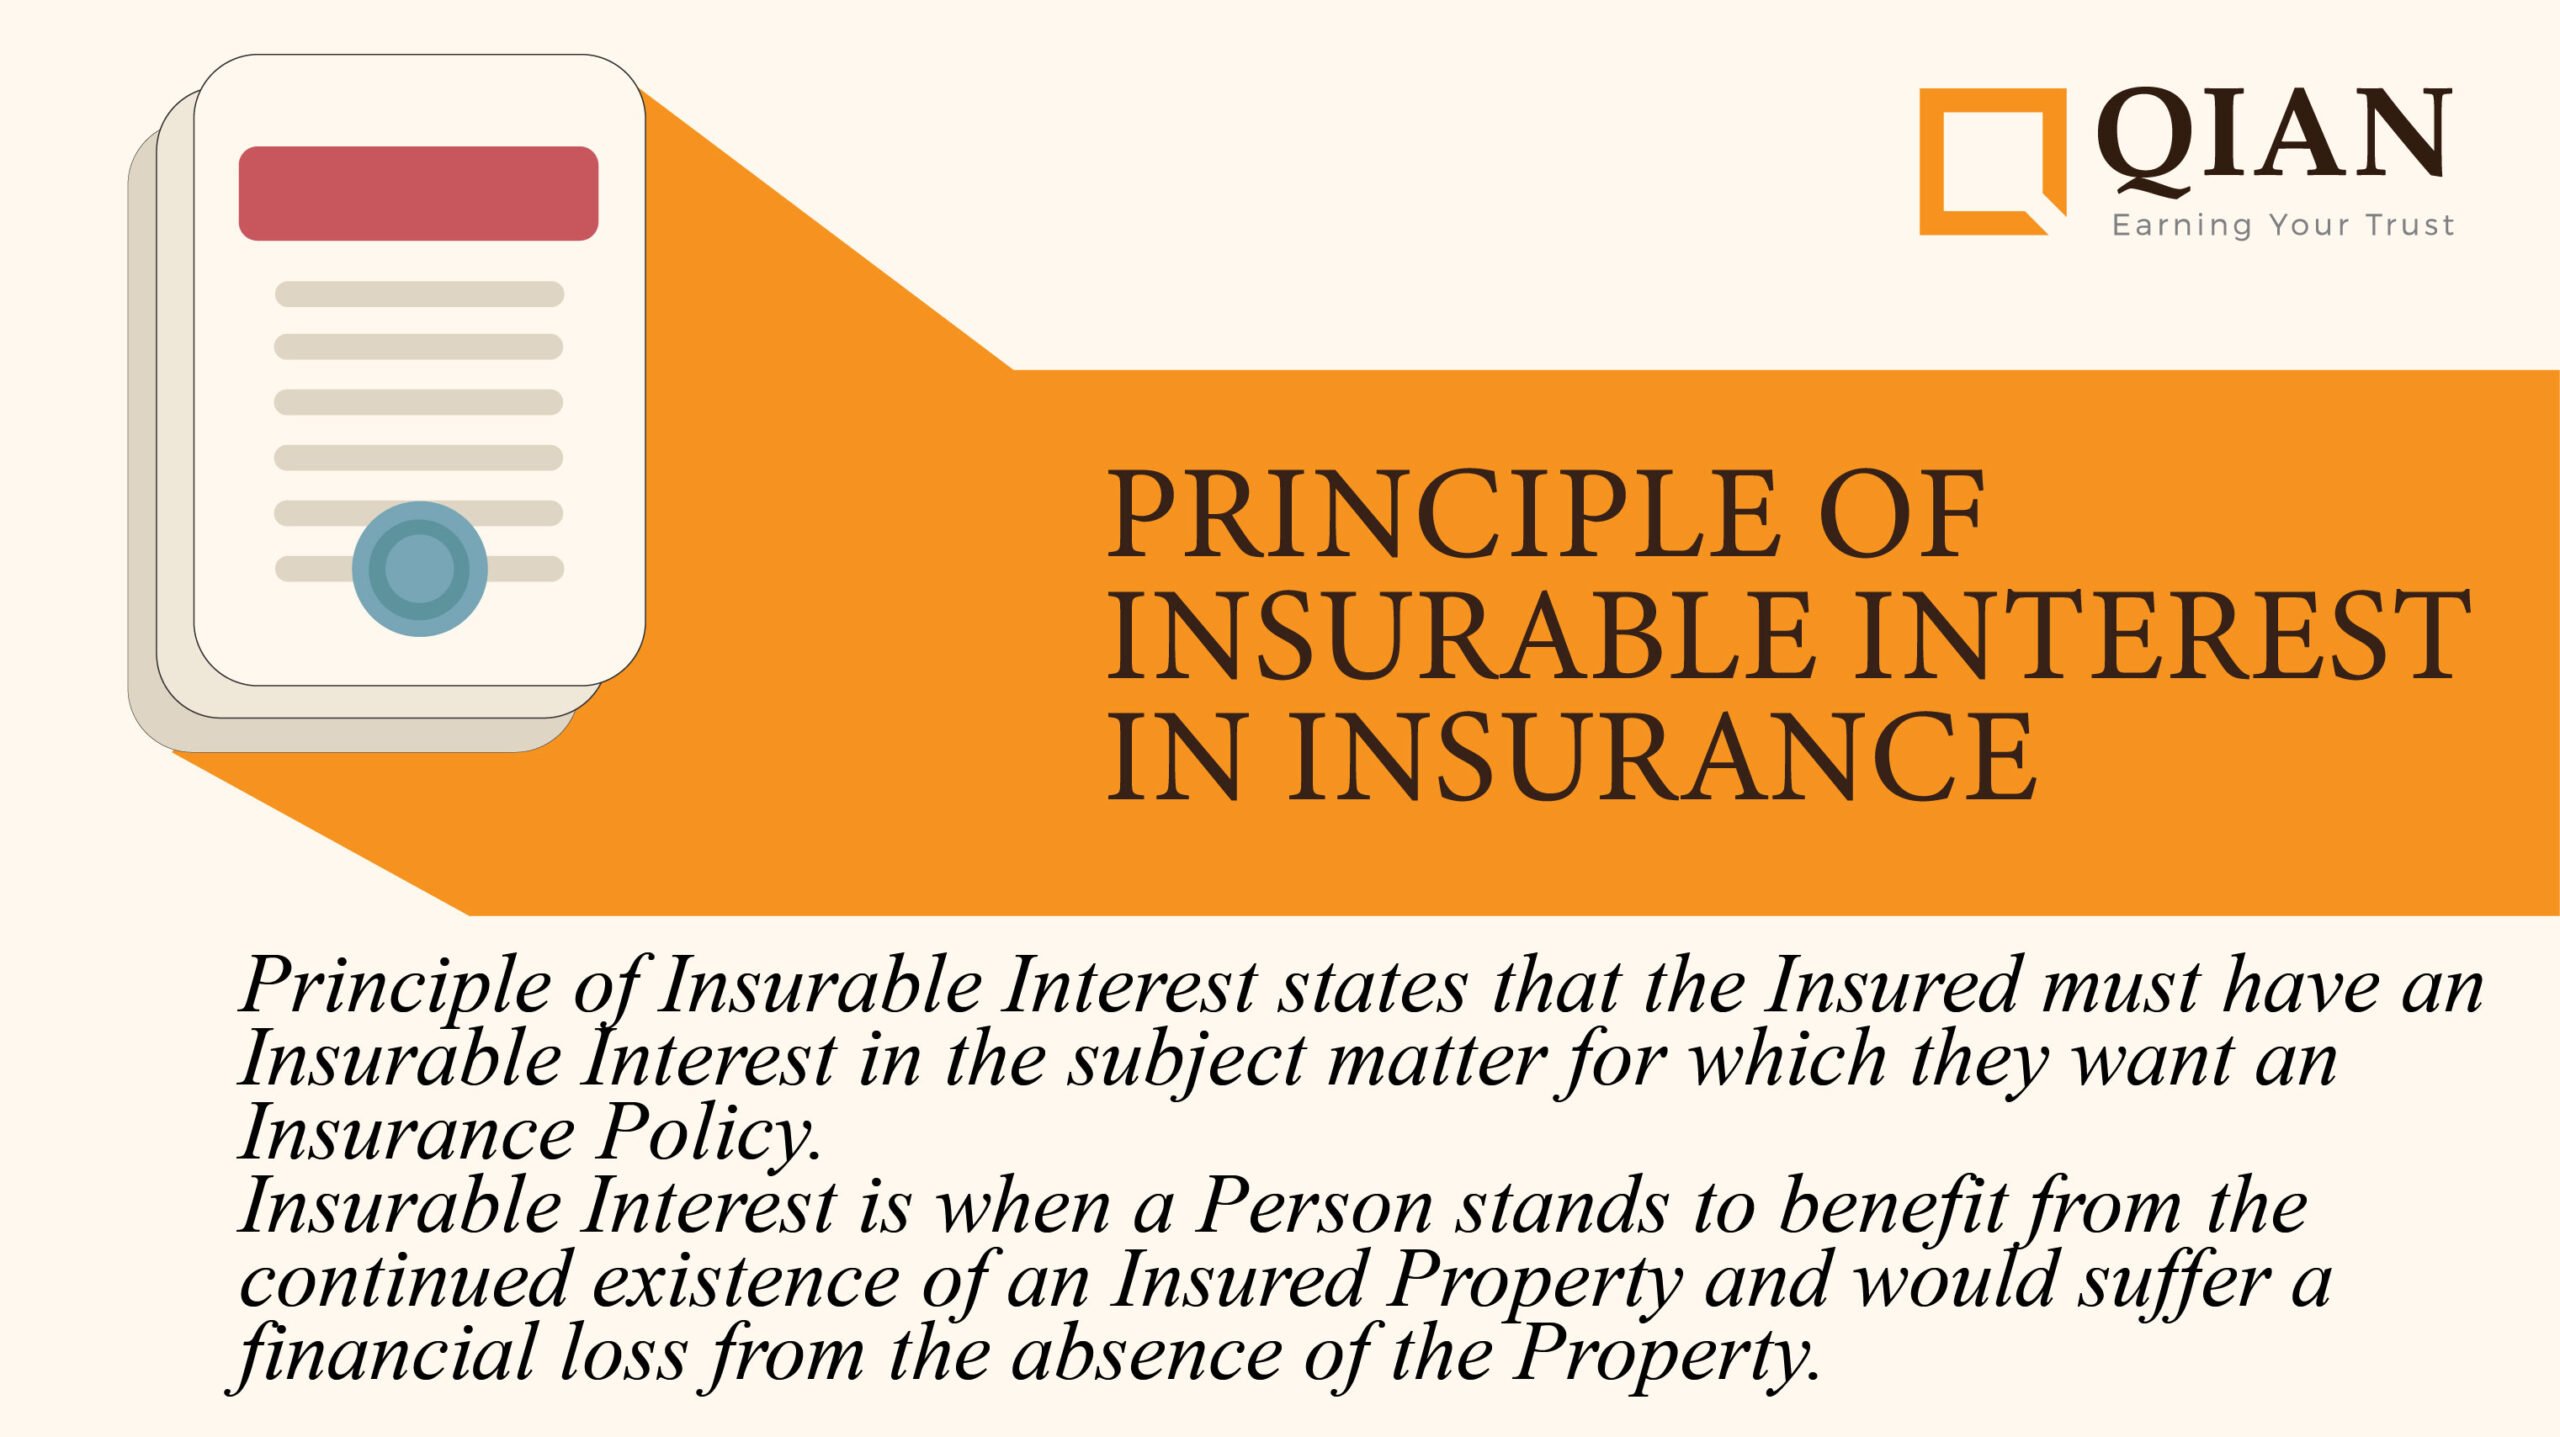 What is Principle of Insurable Interest in Insurance?